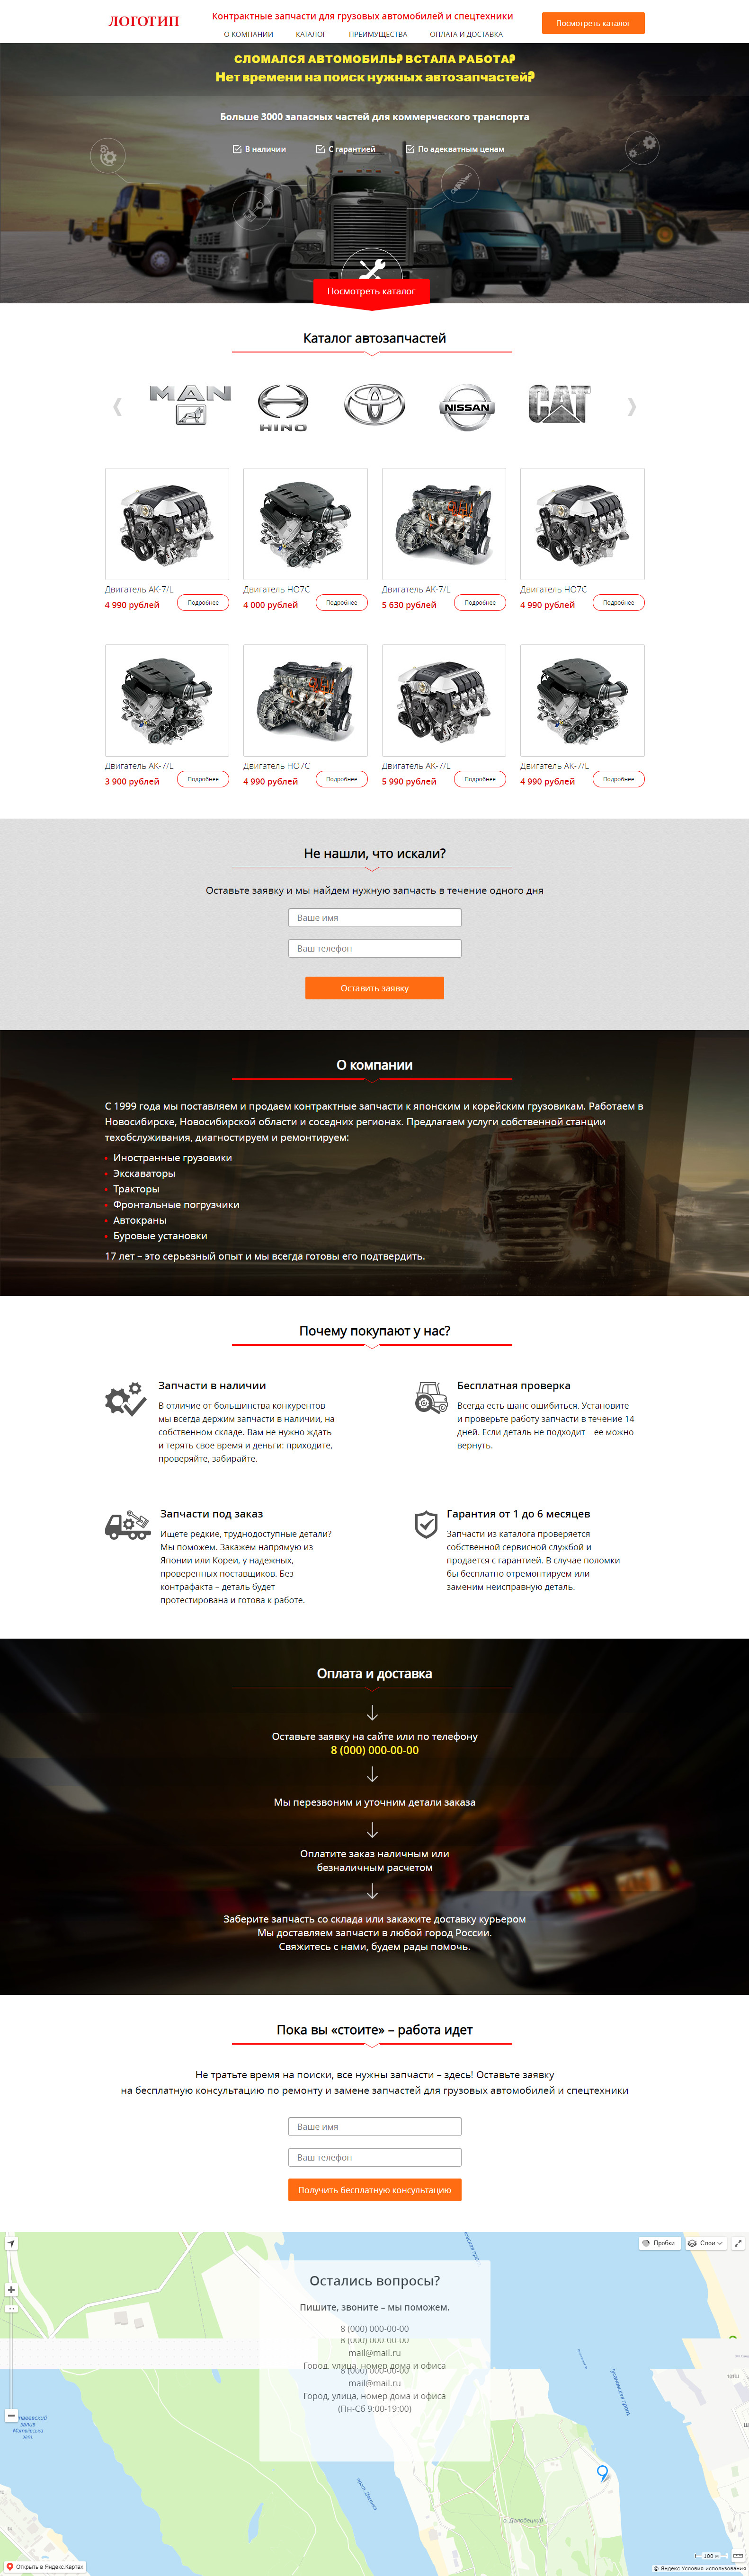 Landing page - Contract spare parts for trucks